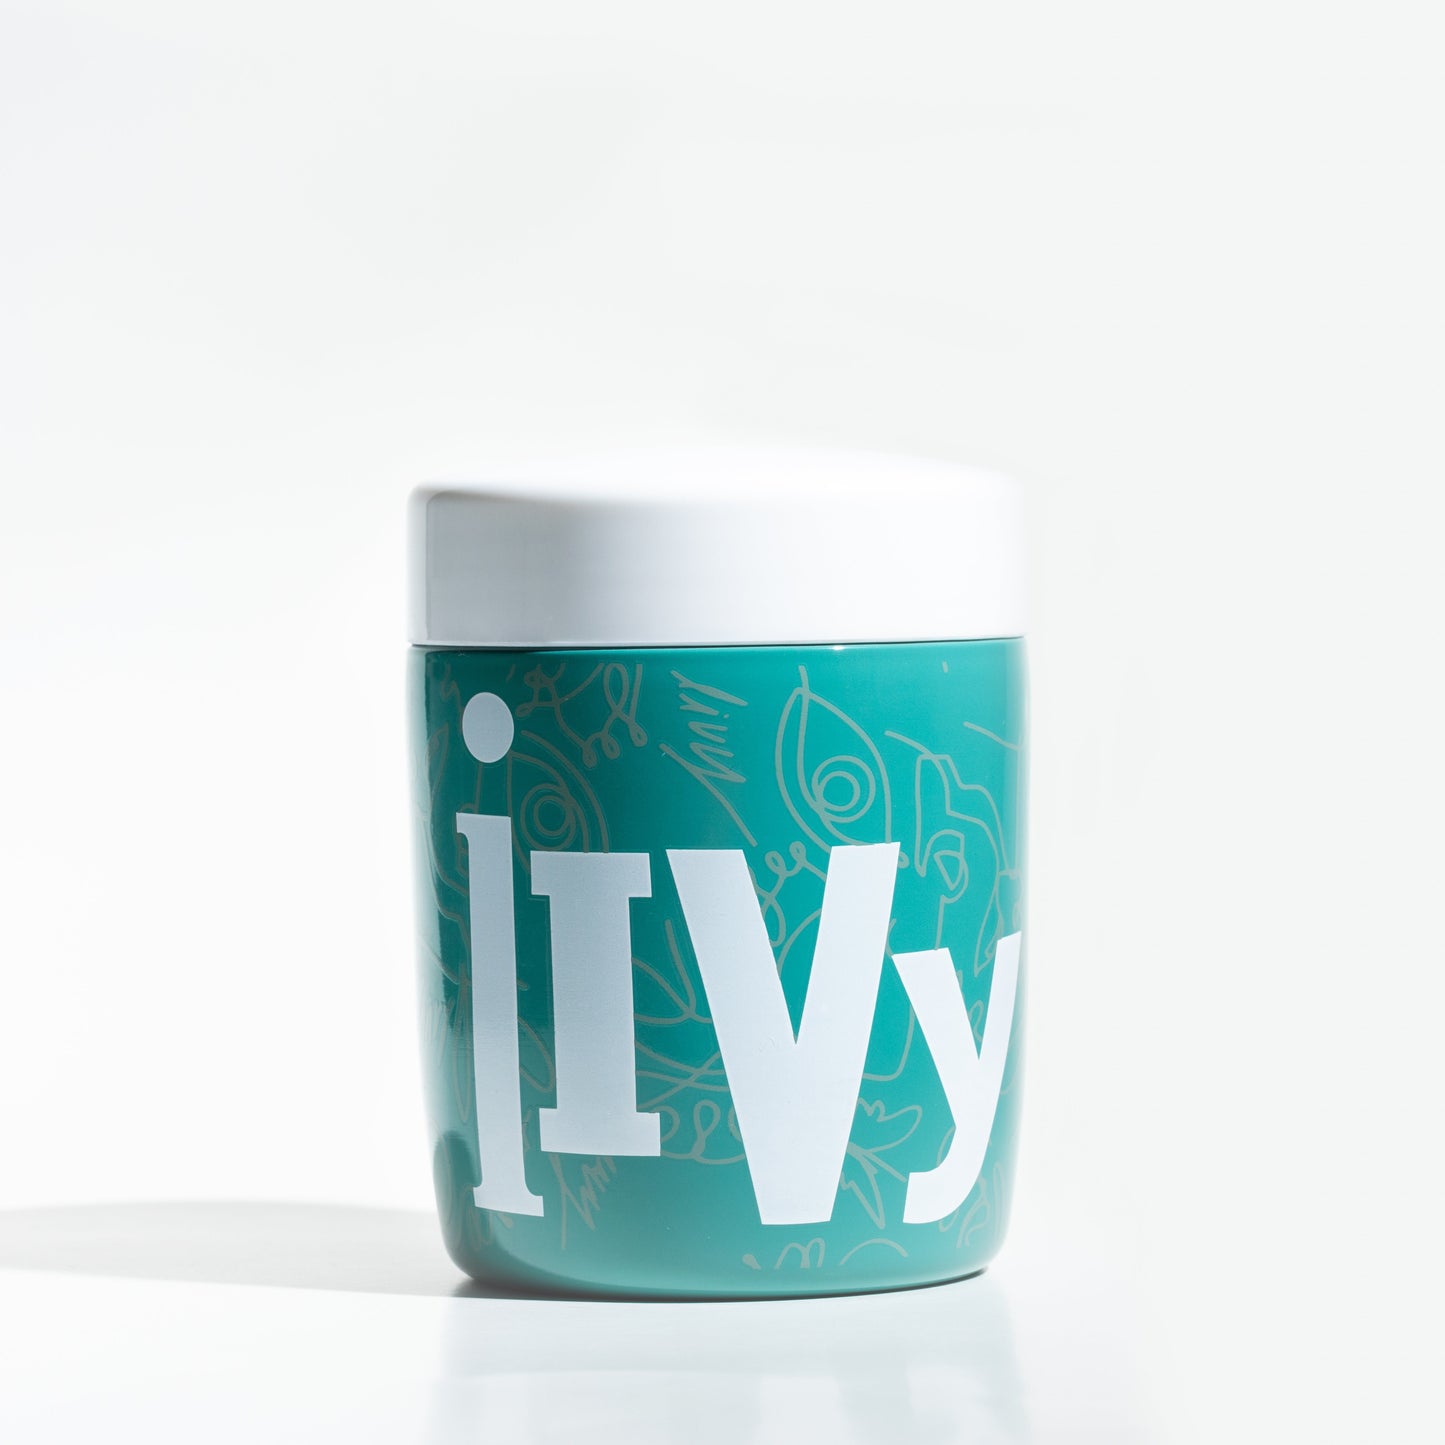 iivy marijuana weed accessories canister teal front